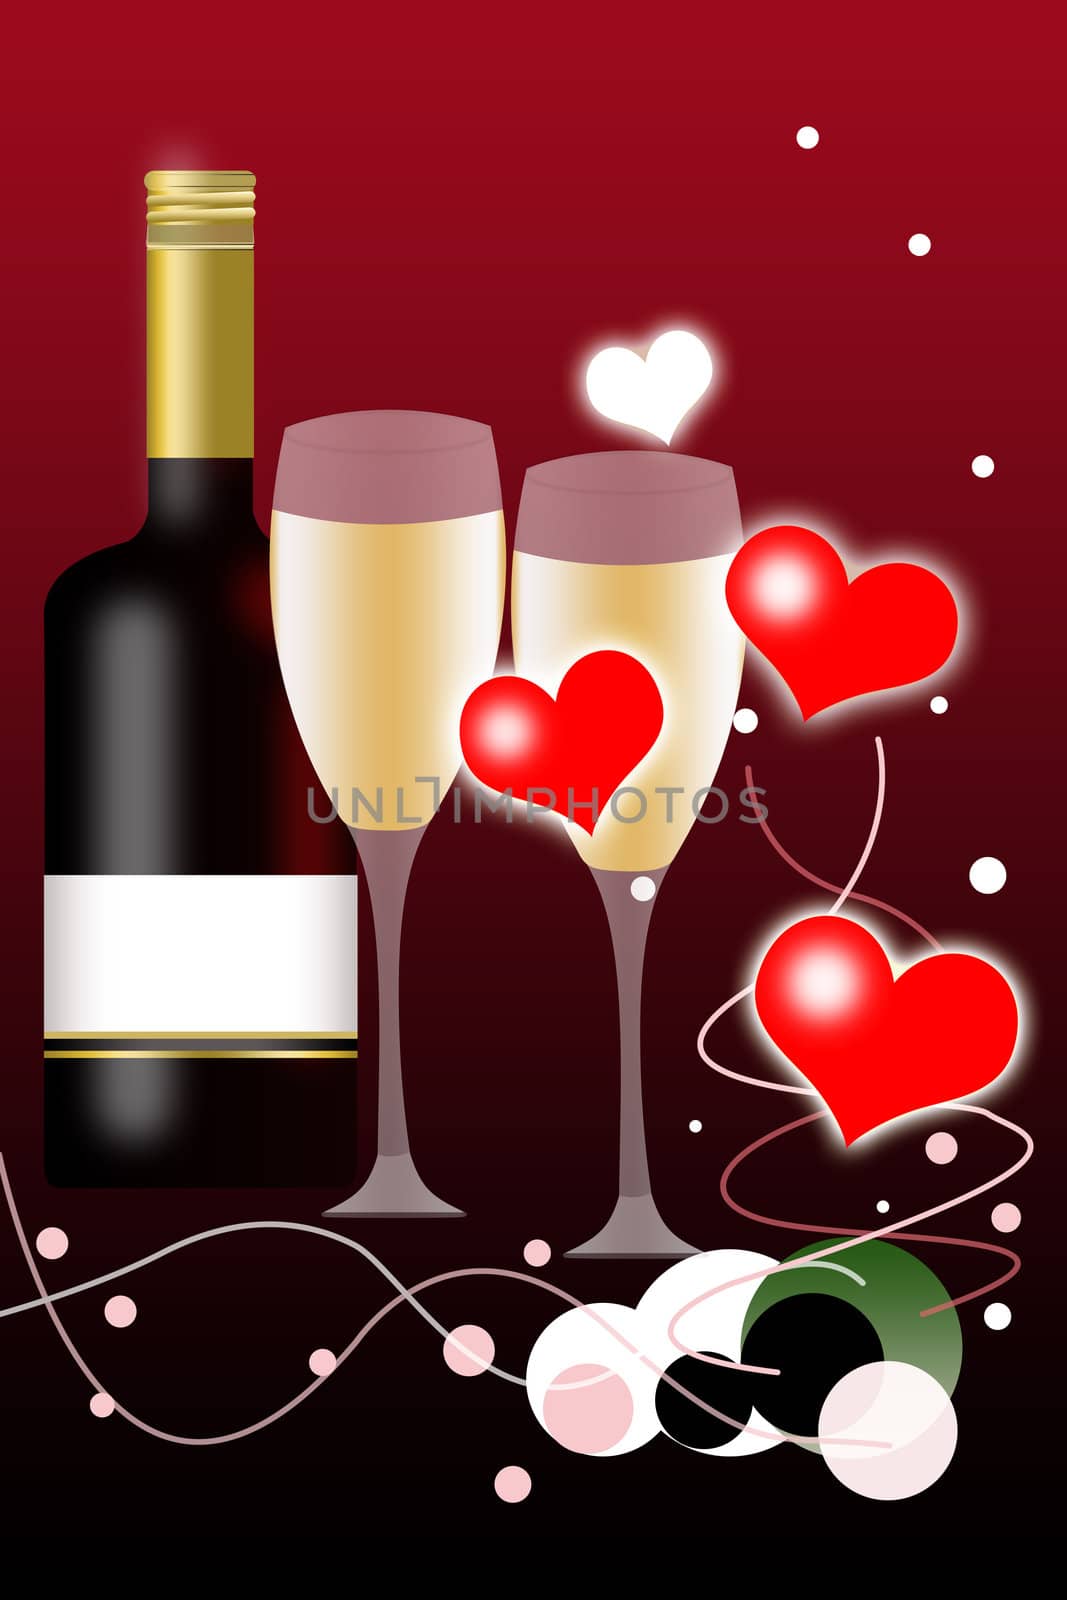 Valentines Day Background Wine Bottle with Blank Label  by mwp1969